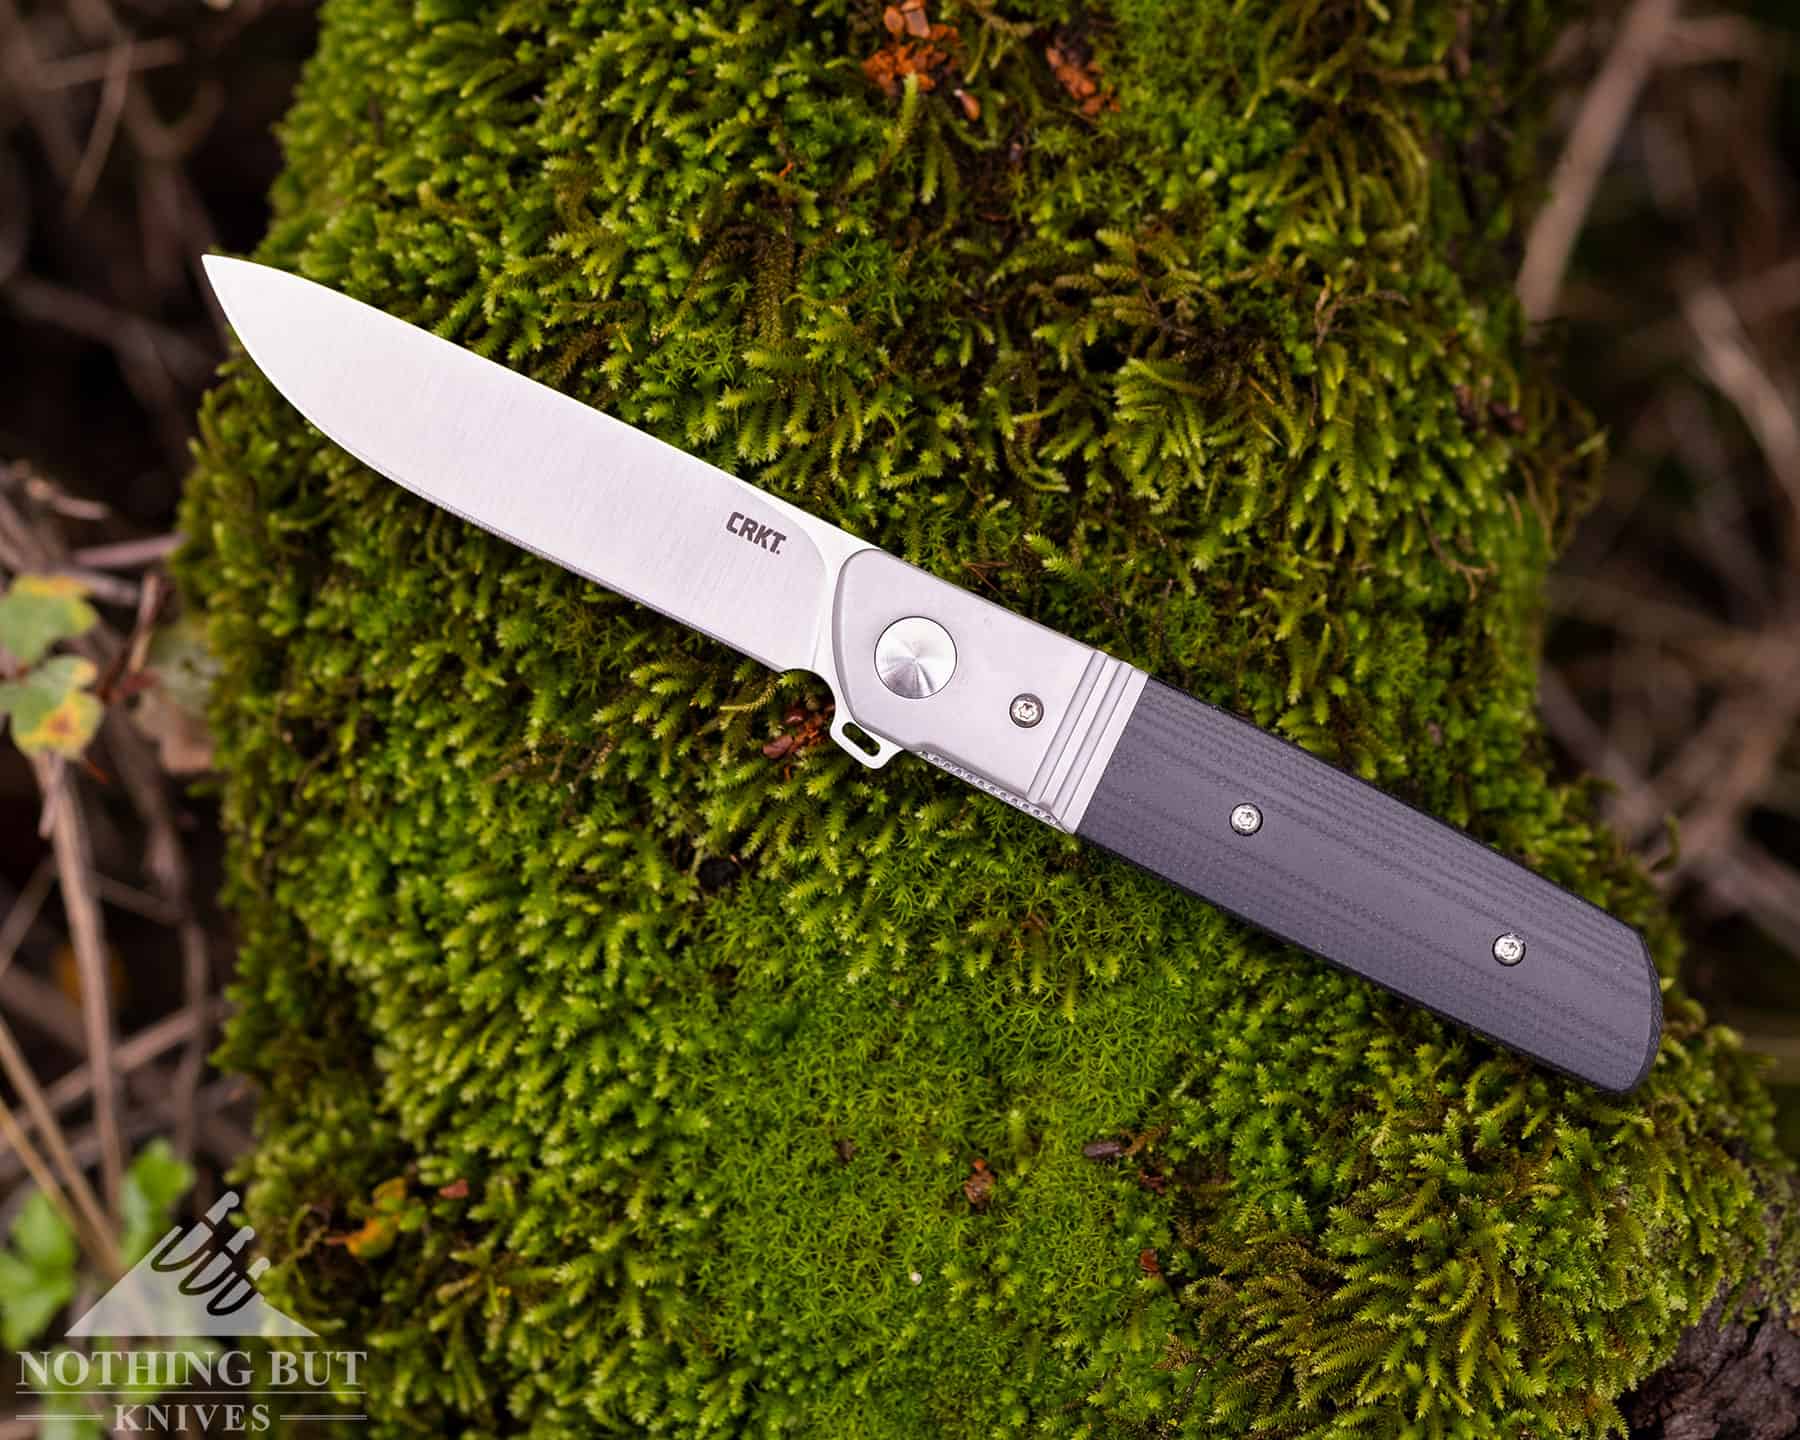 The CRKT is a fun and practical assisted opening pocket knife that is affordable.